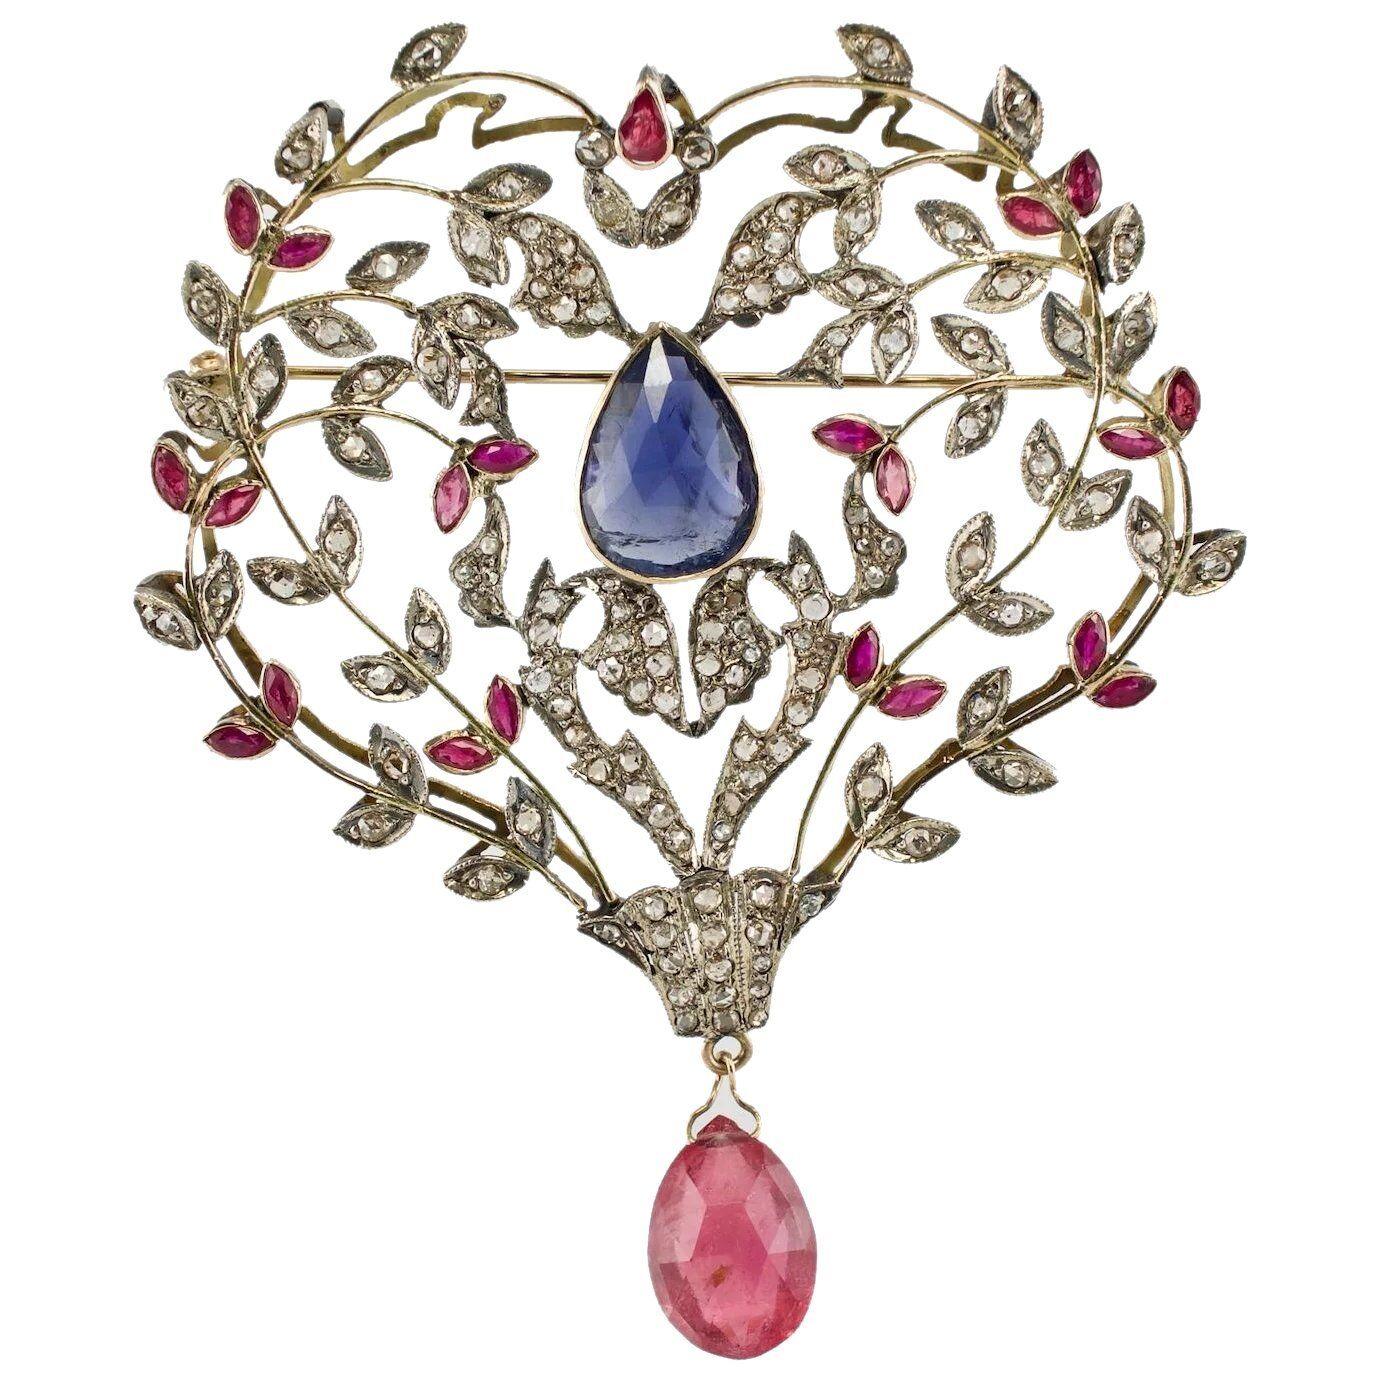 Victorian Diamond Ruby Sapphire Pendant Brooch 14K Gold & Silver

This highly collectible and one of a kind piece is finely crafted in solid 14K Yellow Gold and Sterling Silver for the top. All gems are original for the setting. The center genuine